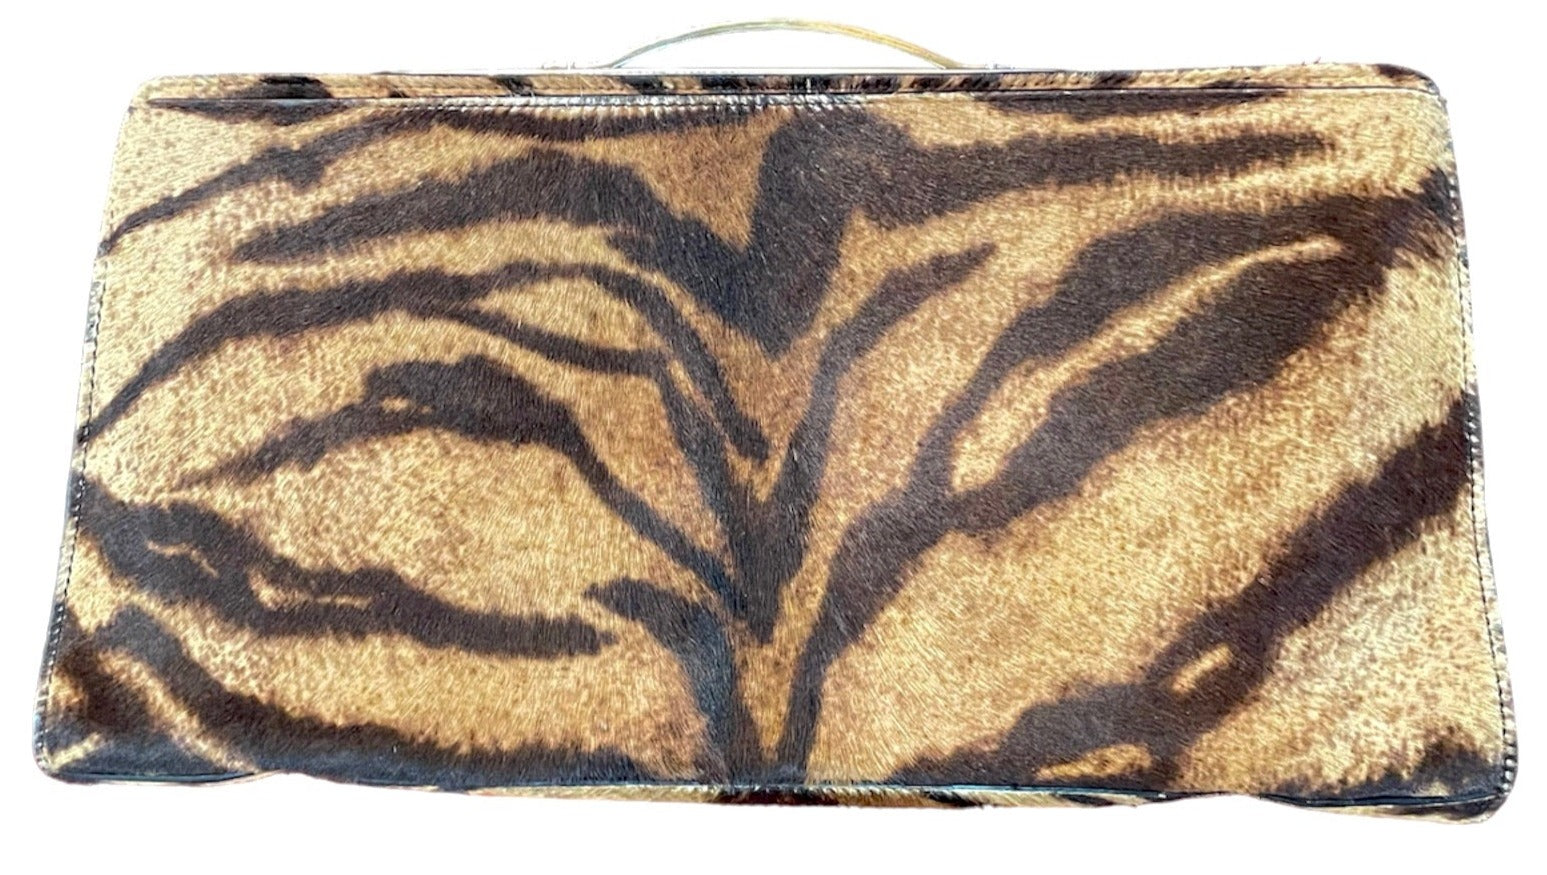 Alaia Rare 90s Tiger Print Clutch with Retractable Handles ALTERNATIVE FRONT 2 of 6